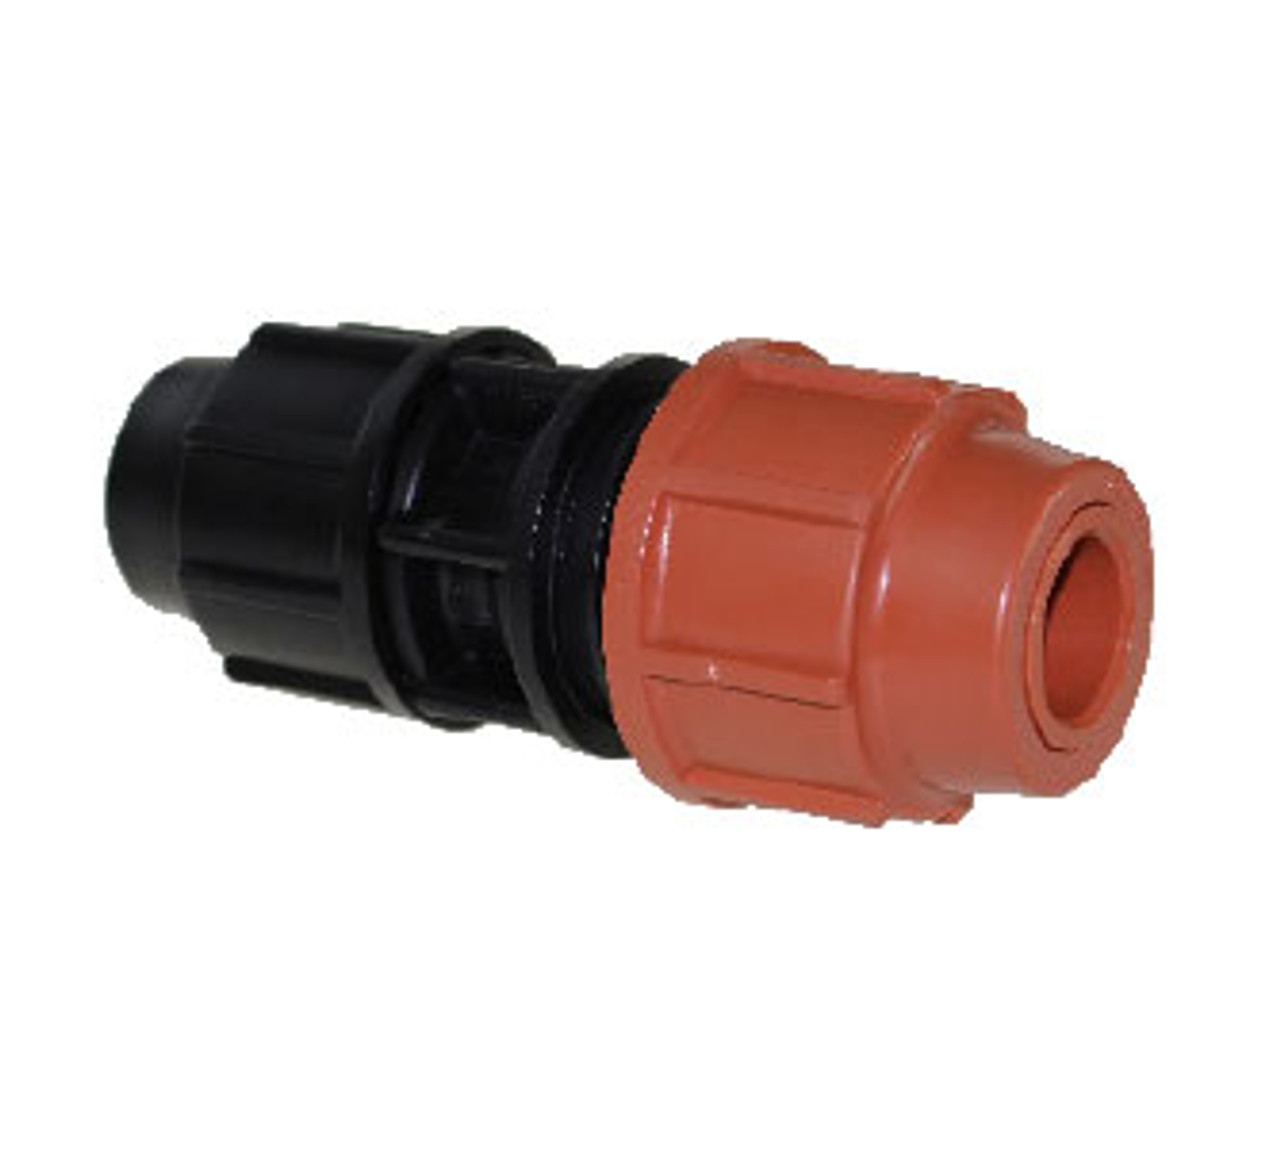 UltraAir Metric Compression Connector - Poly to Copper 25 x 20